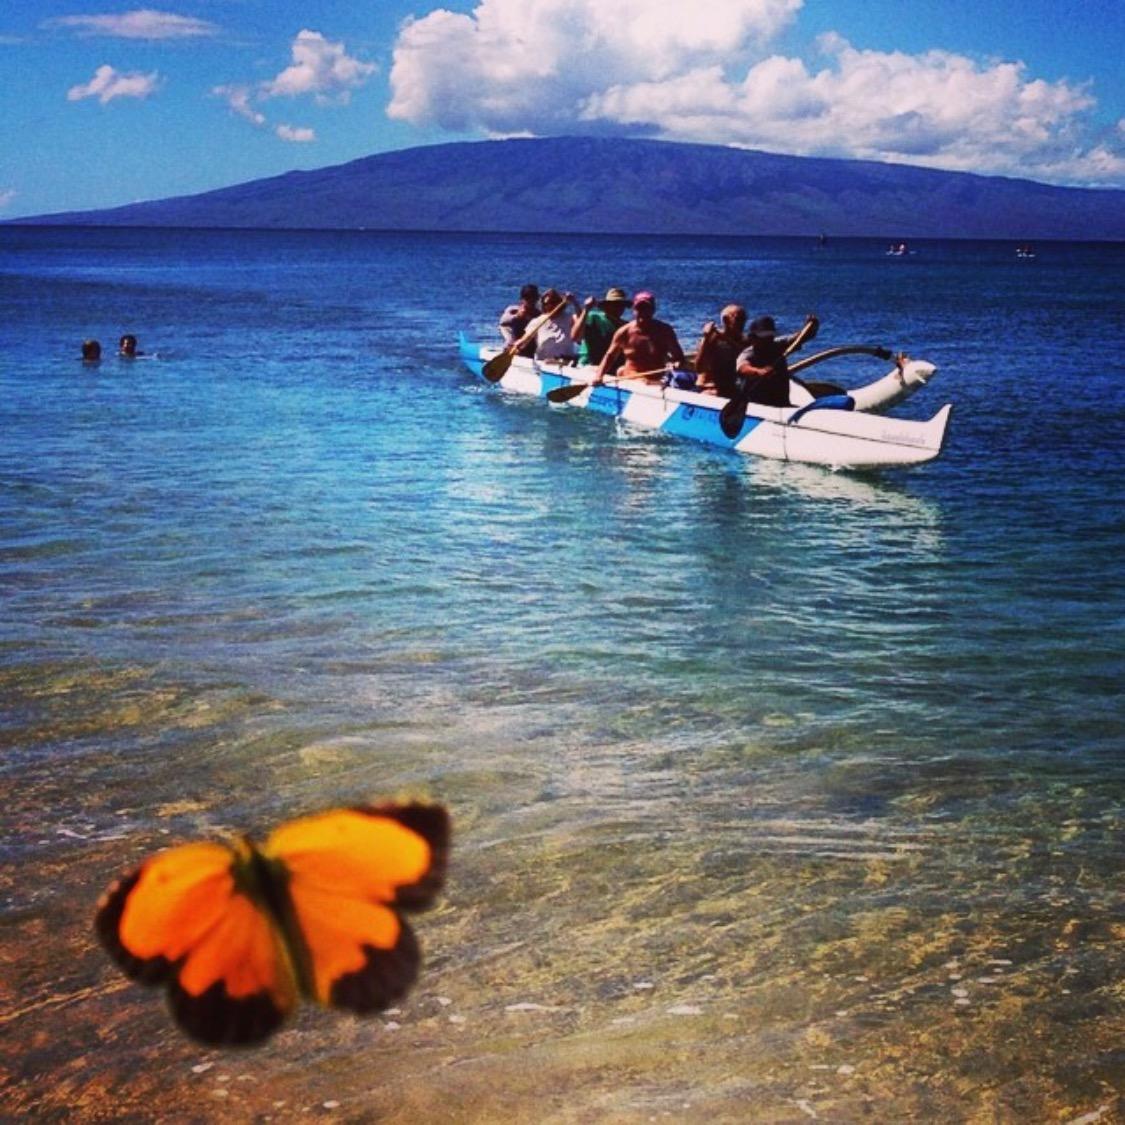 Maui Paddle Sports shows you Hawaii from the local perspective. Go for an outrigger canoe ride and learn some culture and history. We guarantee FUN!